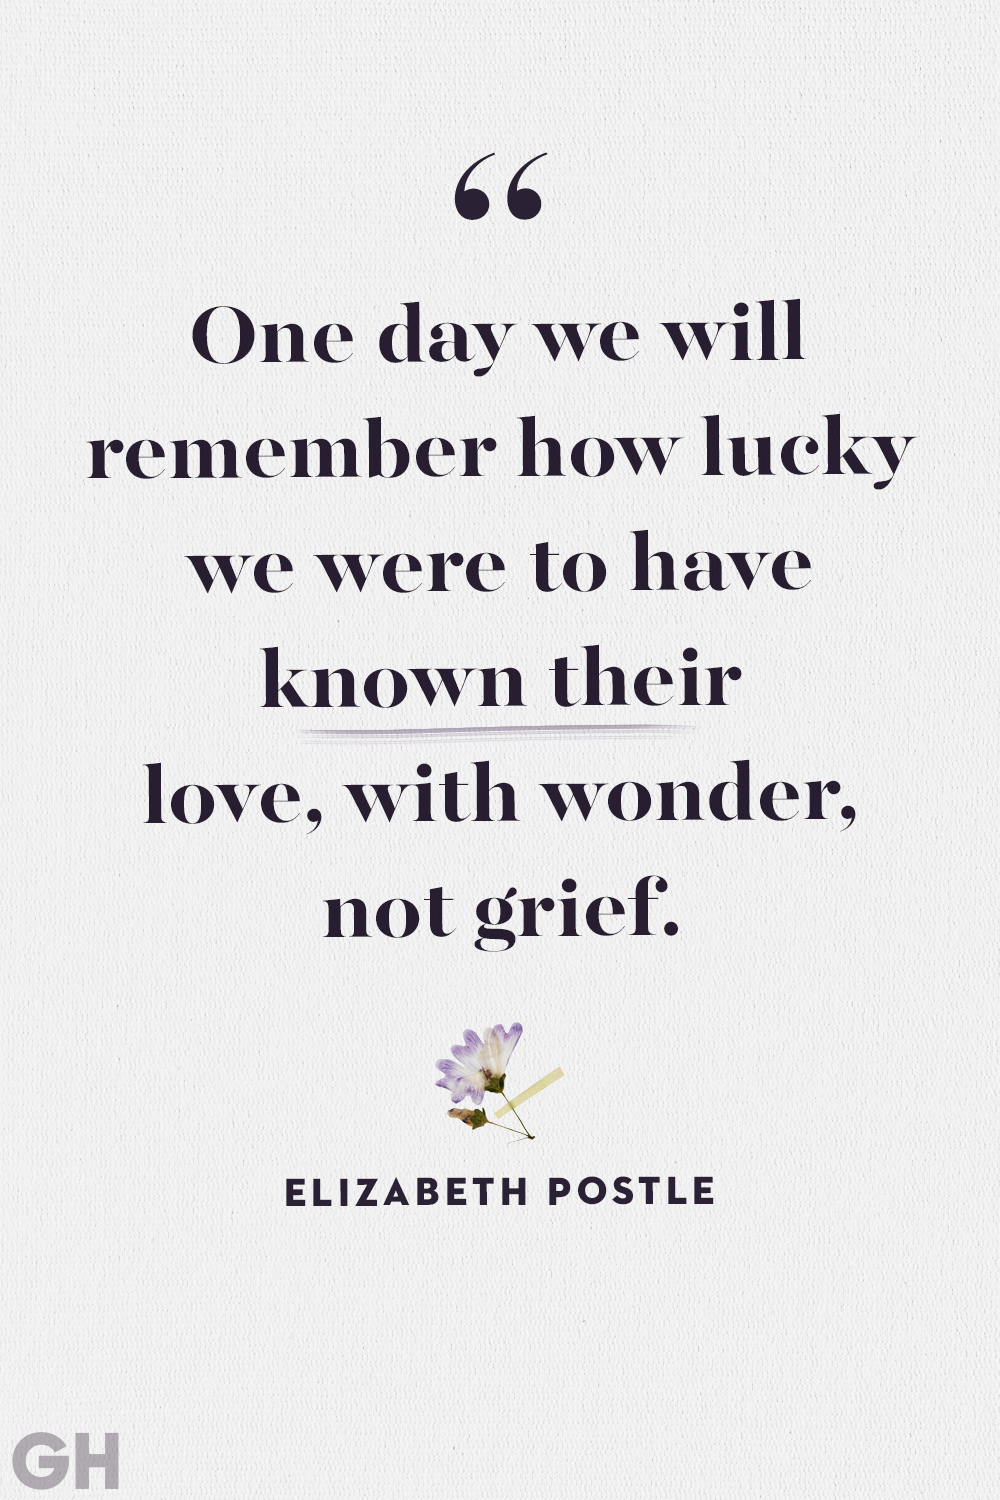 losing a loved one quotes